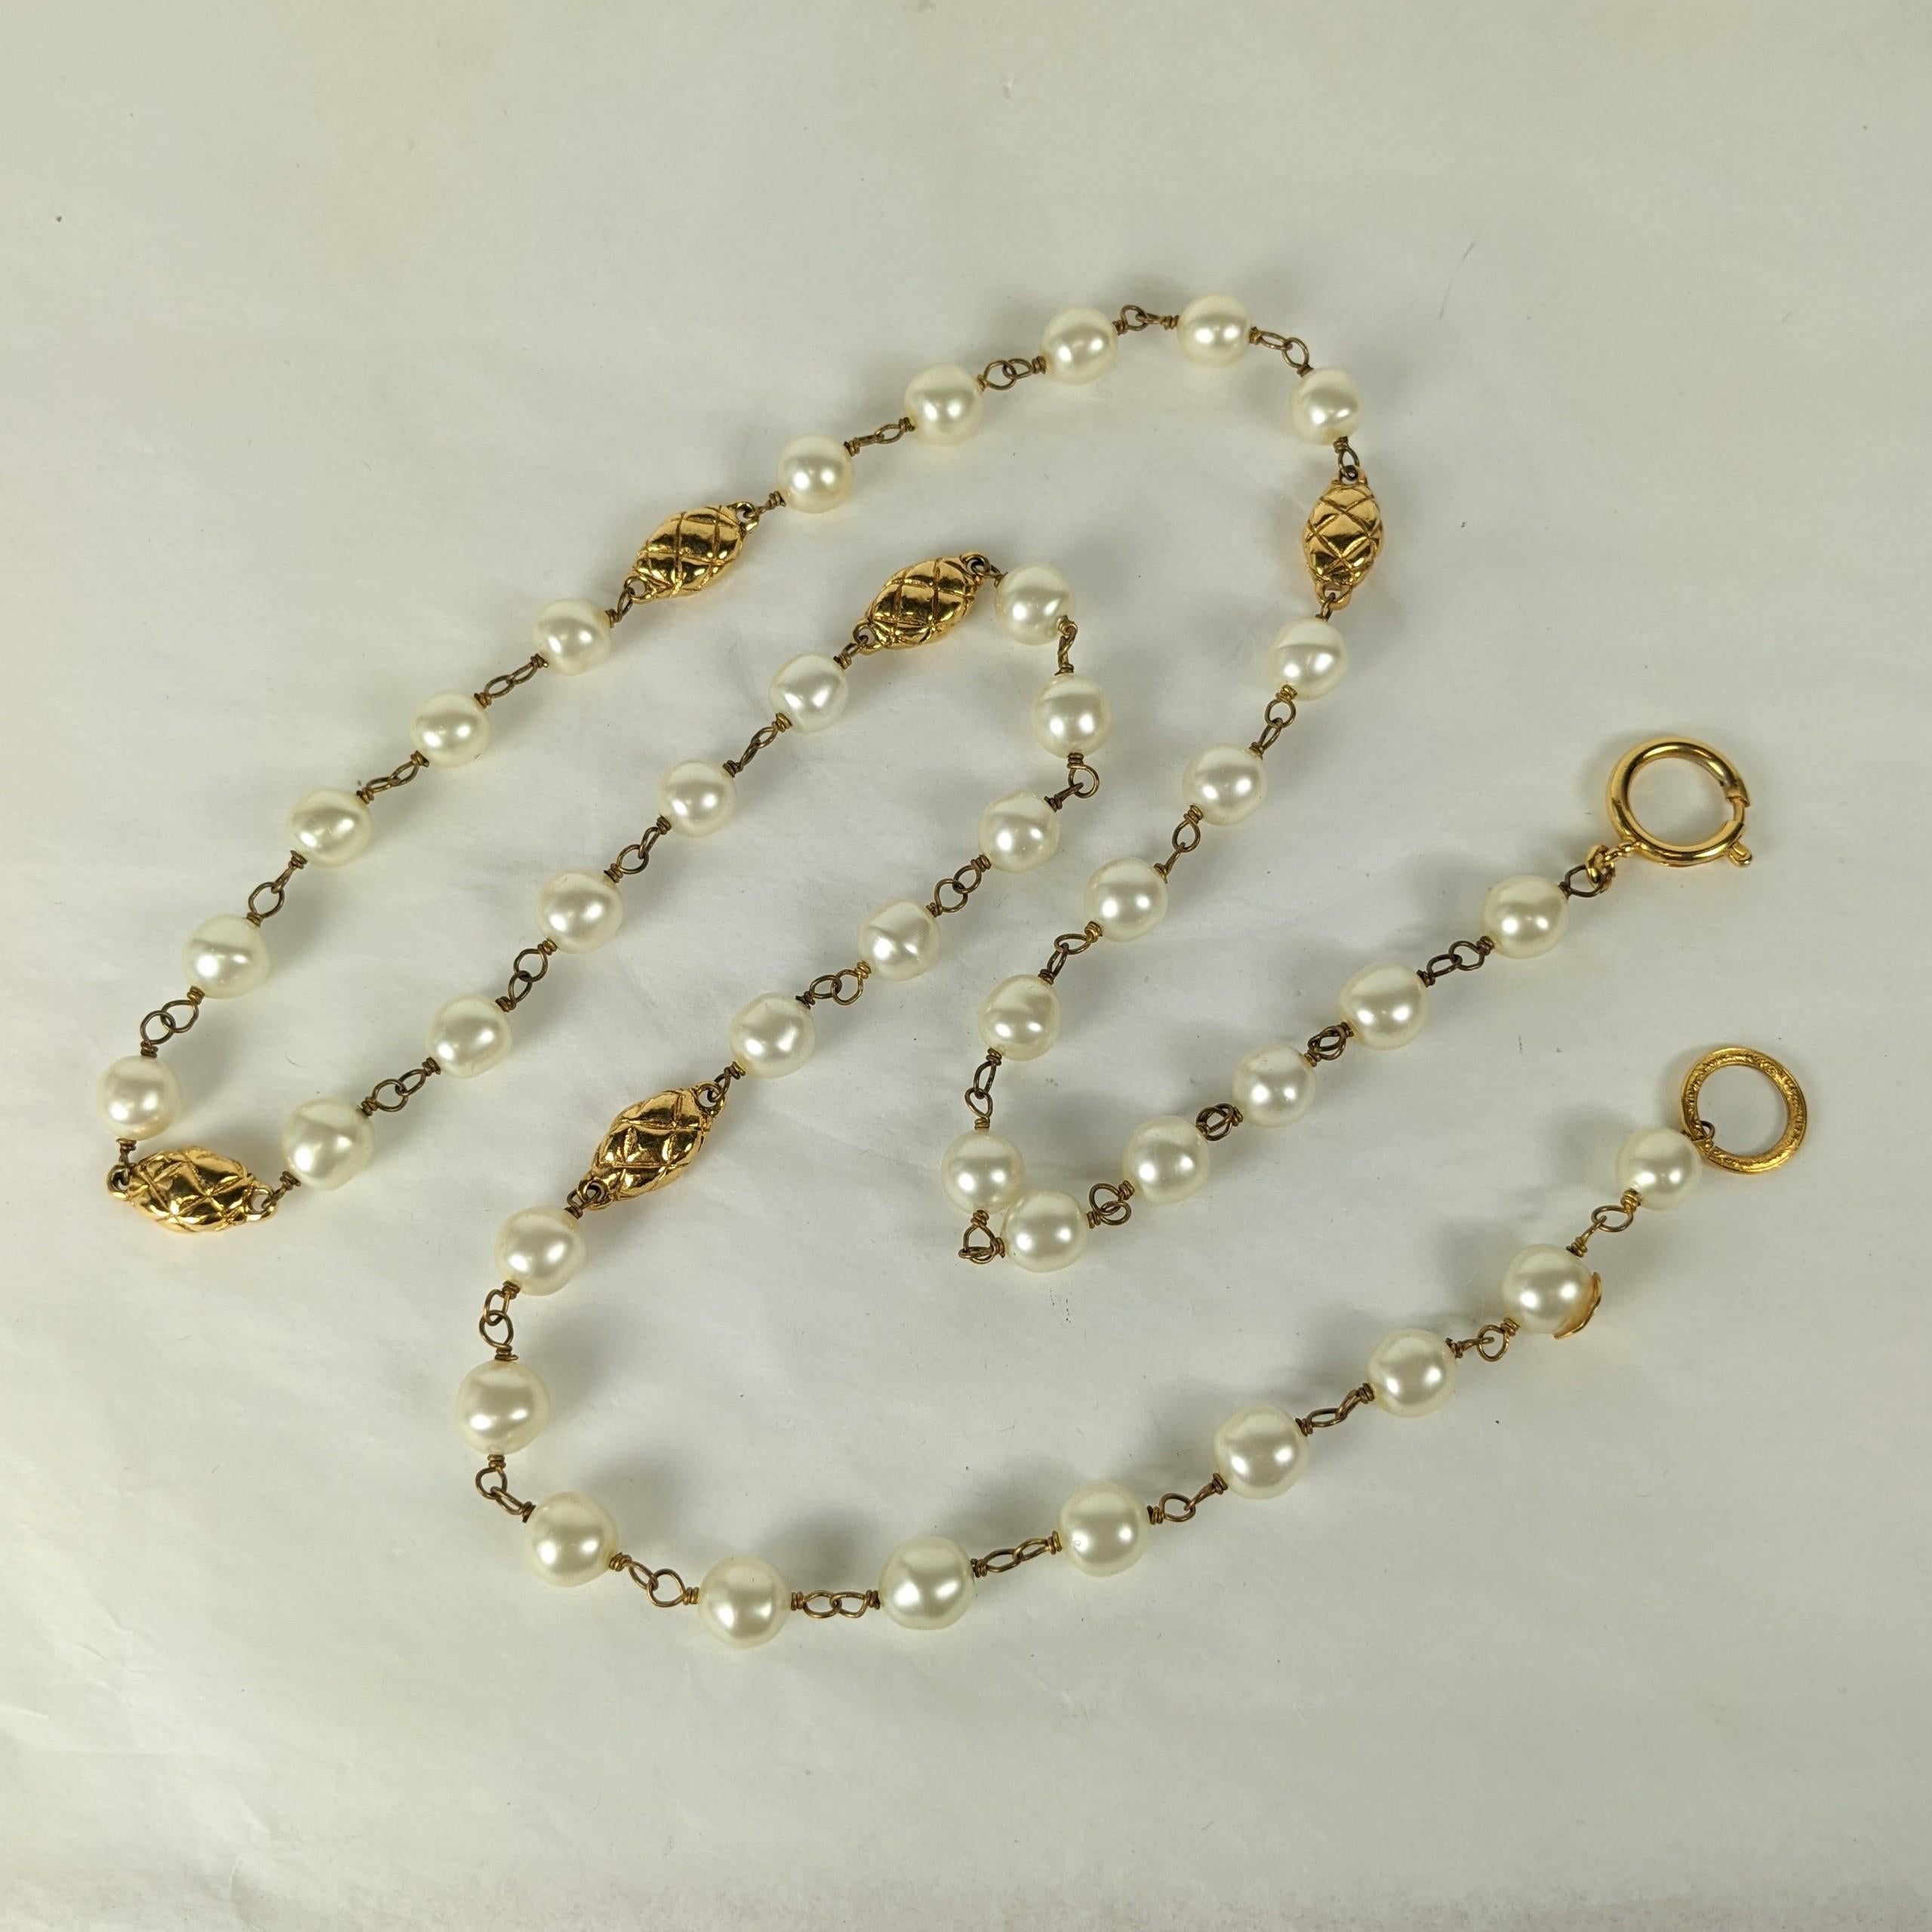 Chanel Pearl and Quilted Bead Chain with wire wrapped Gripoix glass pearls and stations of gilt quilted bronze beads to replicate the quilting on famed Chanel bags.
Versatile with clasp, 36